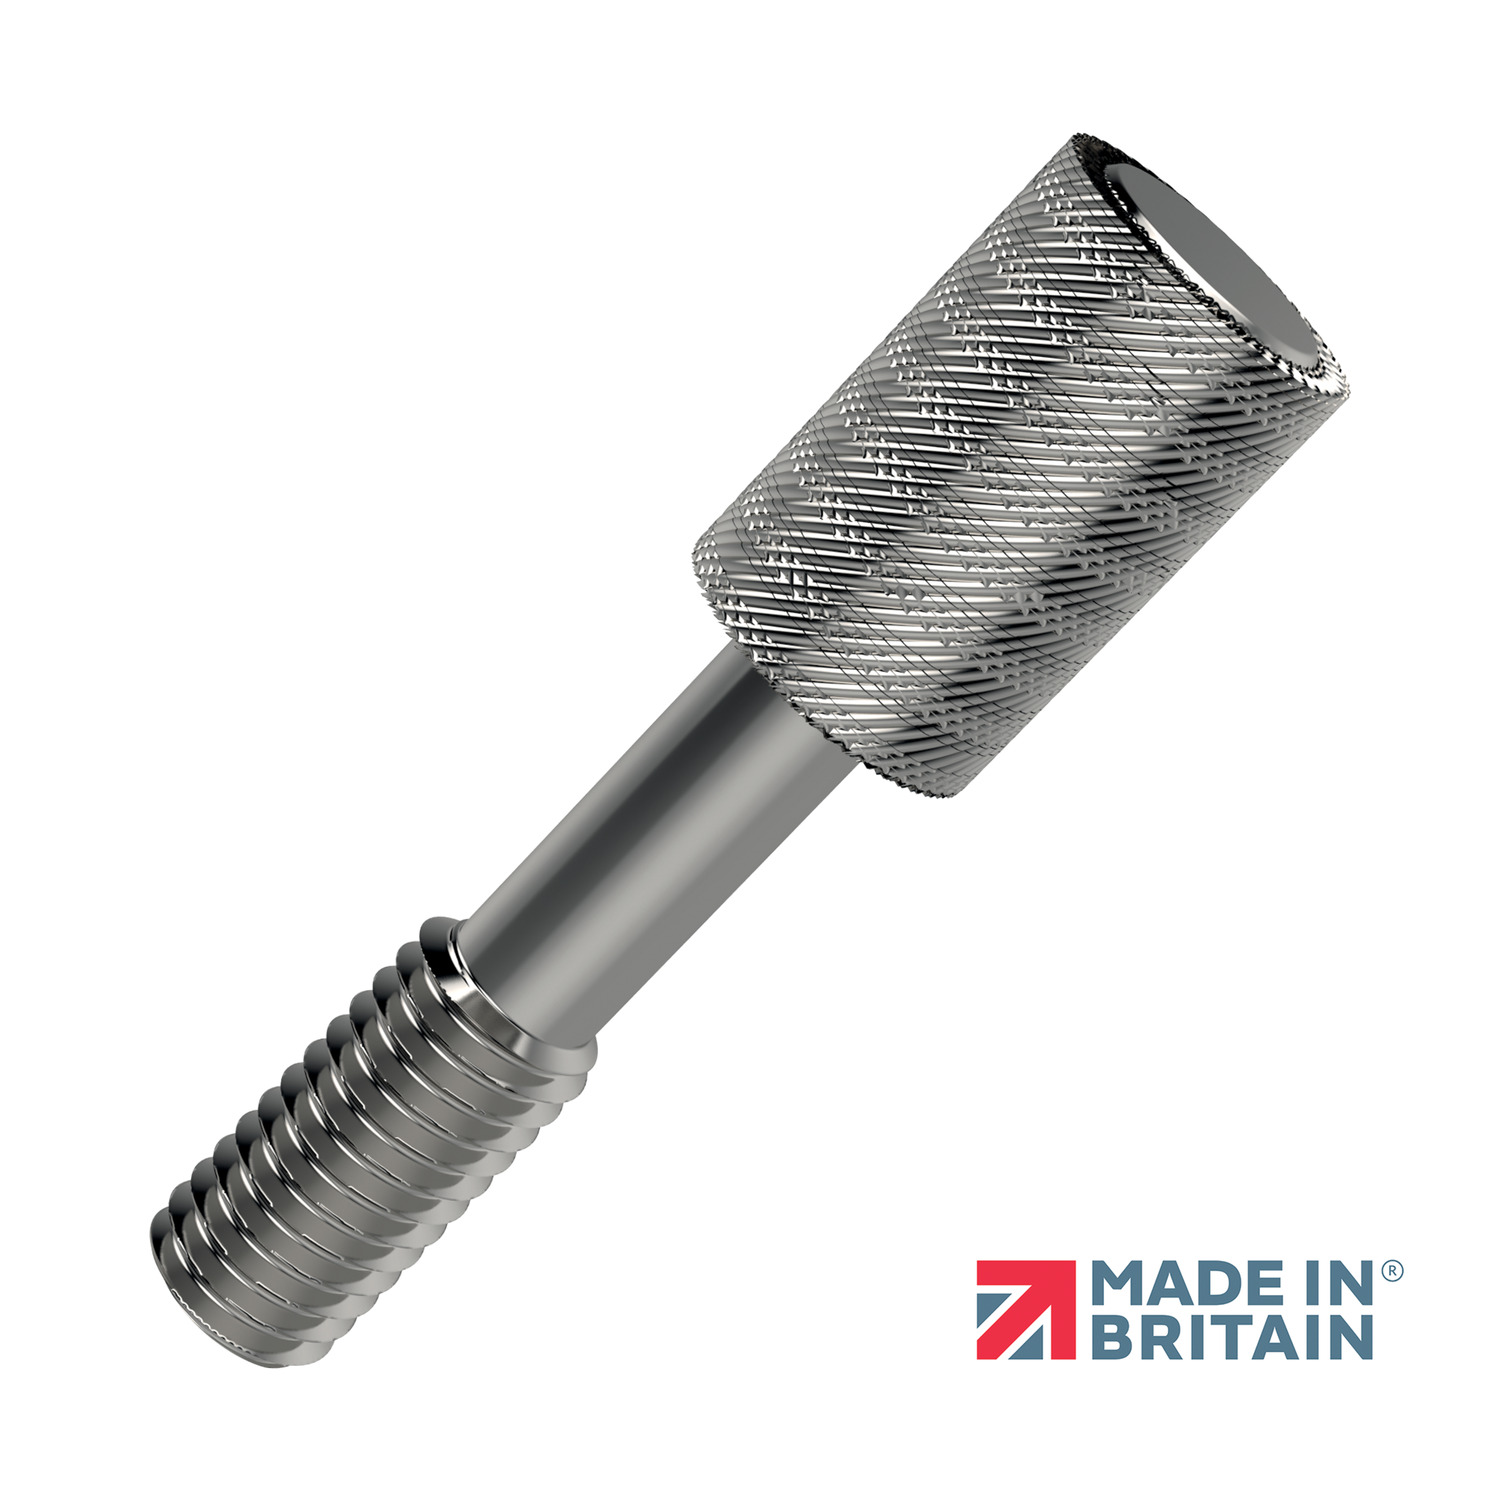 Product P0160.A2, Captive Thumb Screws 303 stainless / 